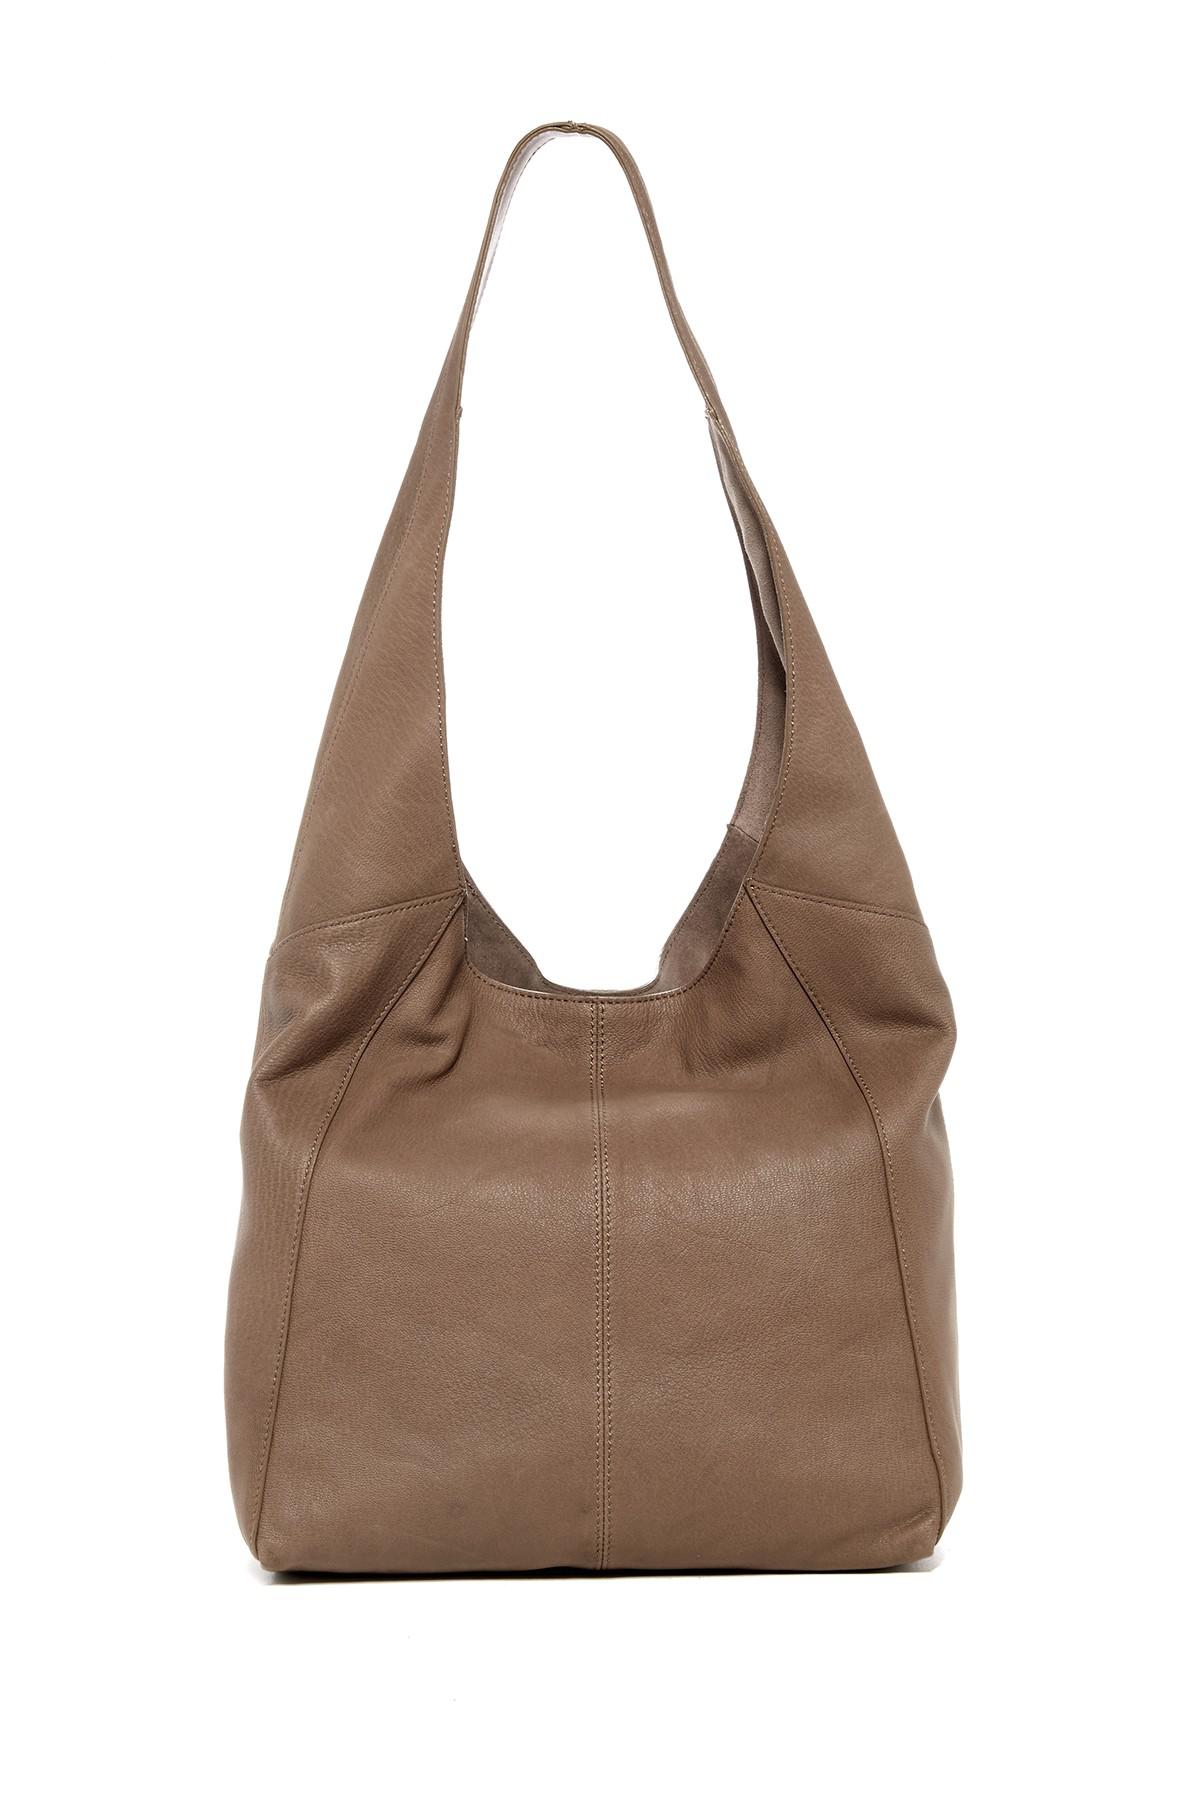 Lucky Brand Patti Leather Hobo Shoulder Bag | Lyst